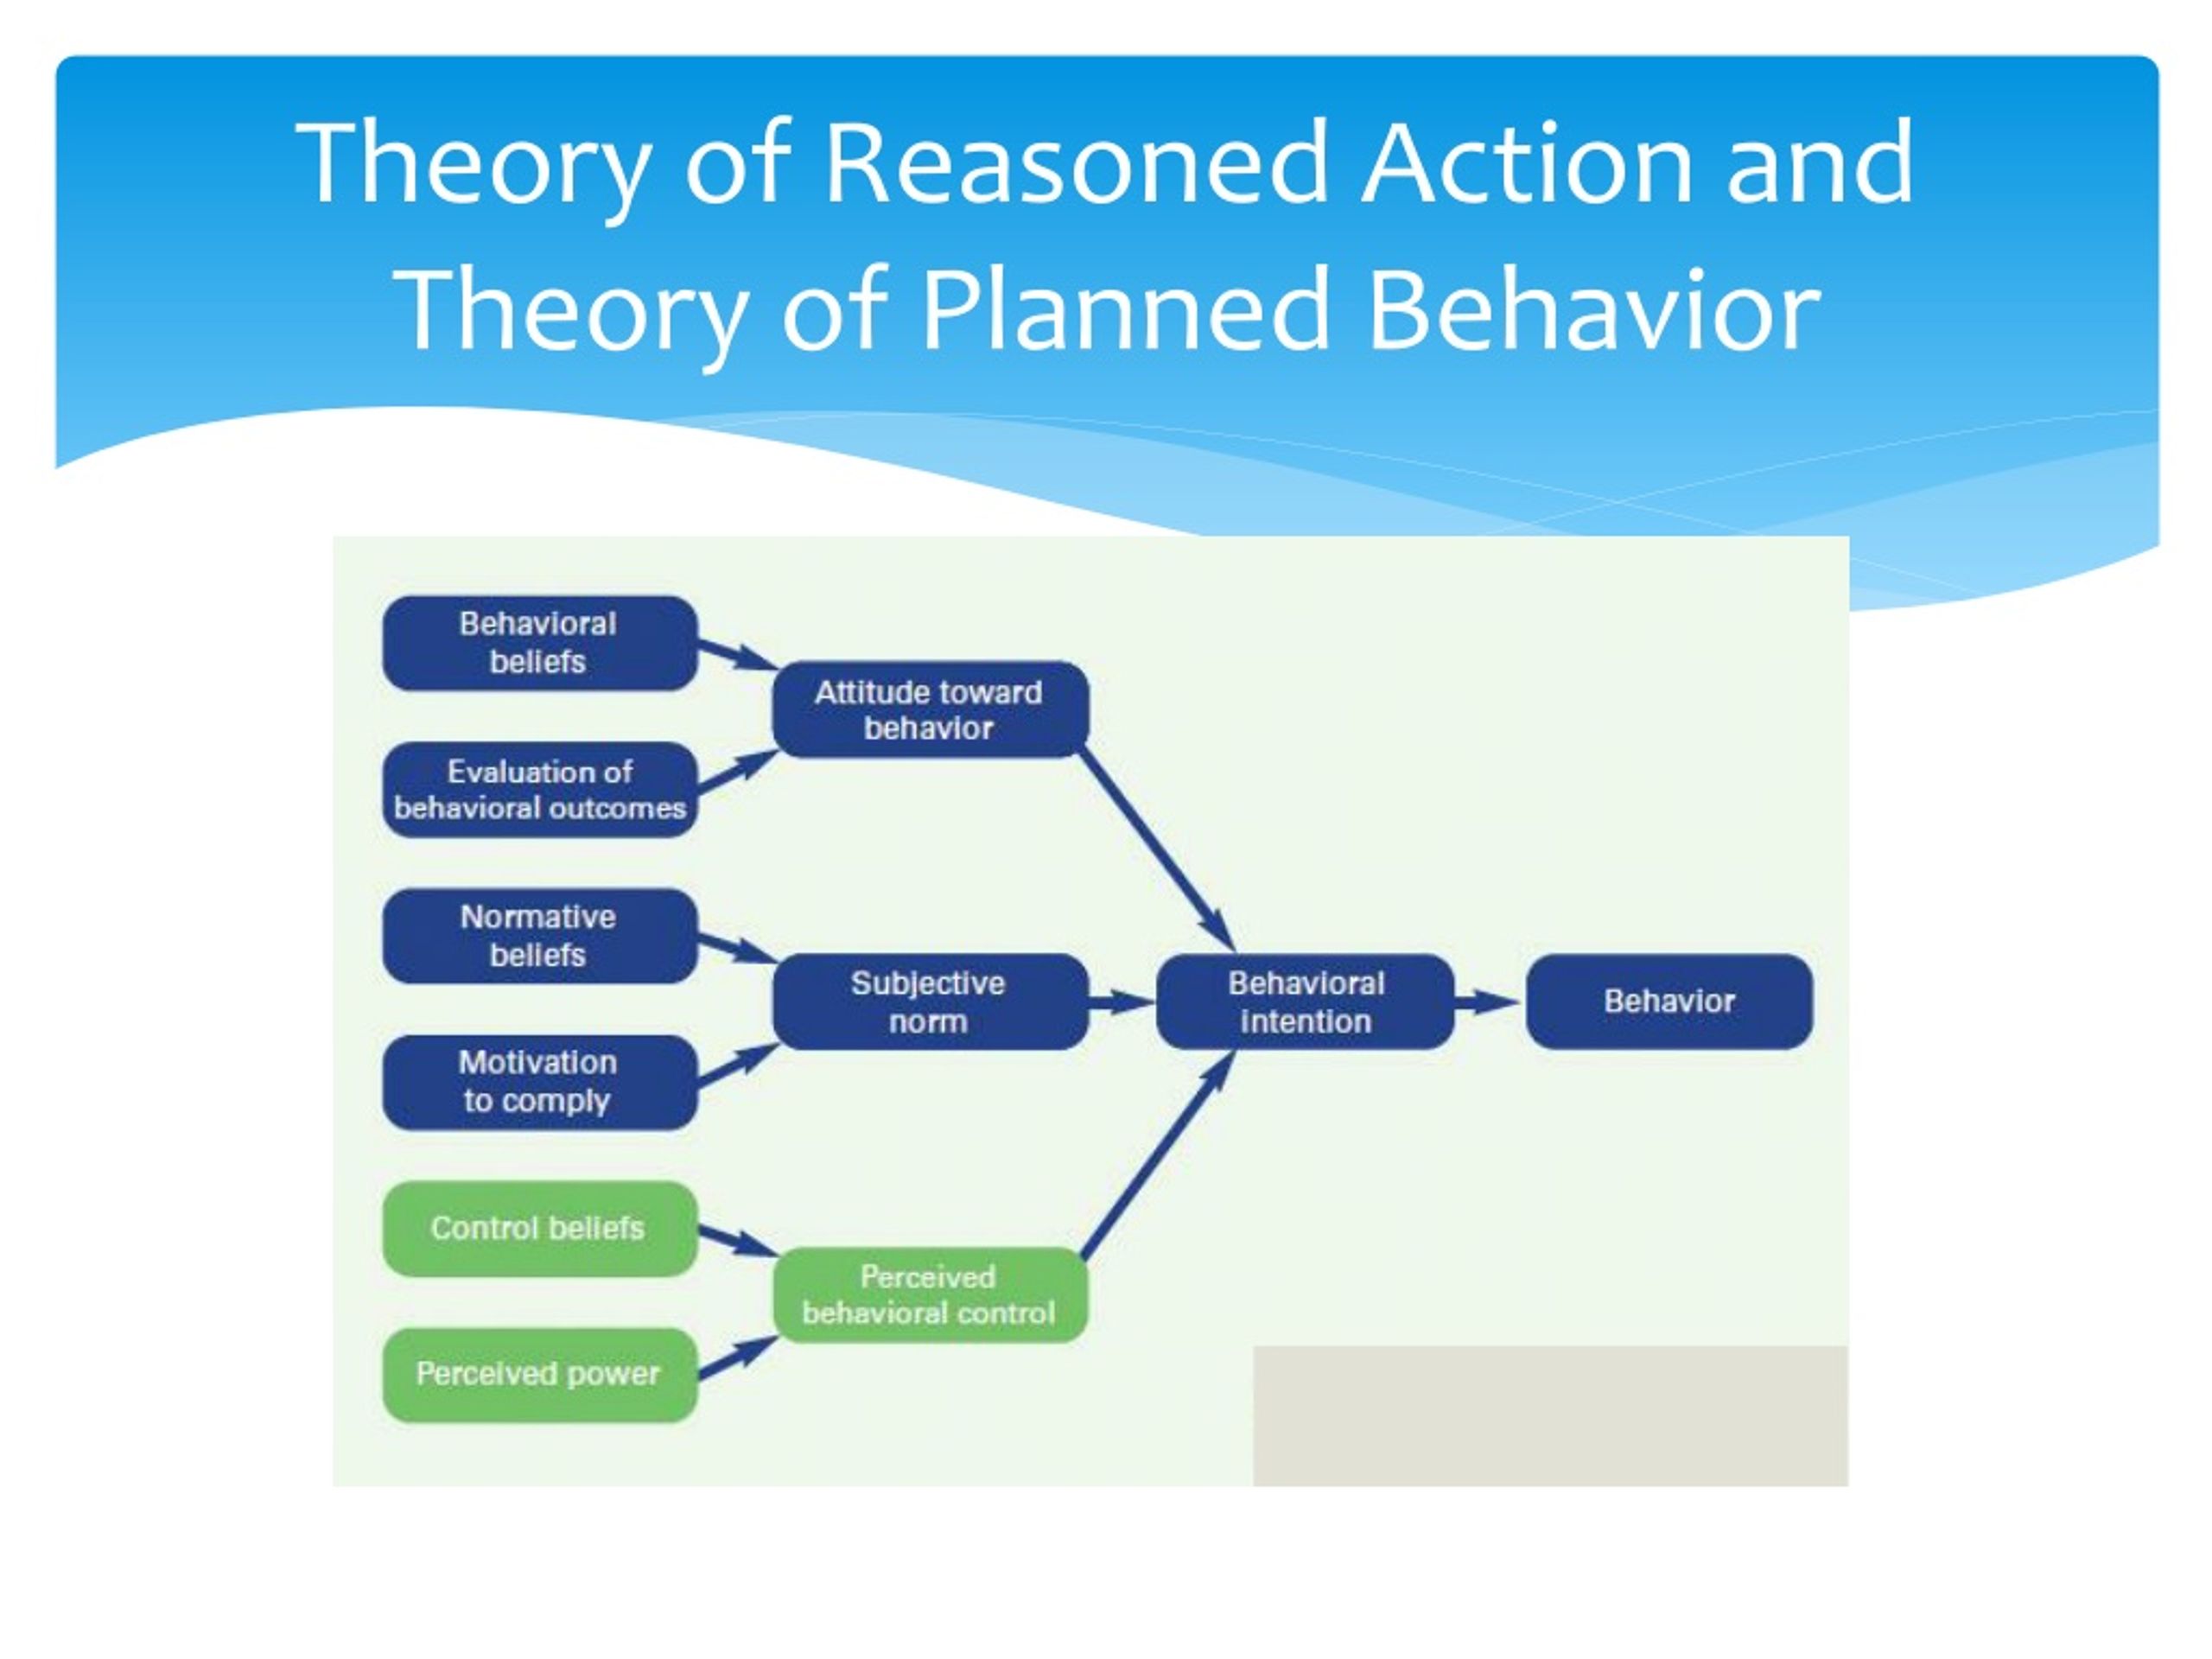 Theory of reasoned Action. Theory of planned Behavior. Theory of reasoned Action; planned Behavior Theory по русски. Theory of reasoned Action (tra) картинка аббревиатура. Controlling behavior